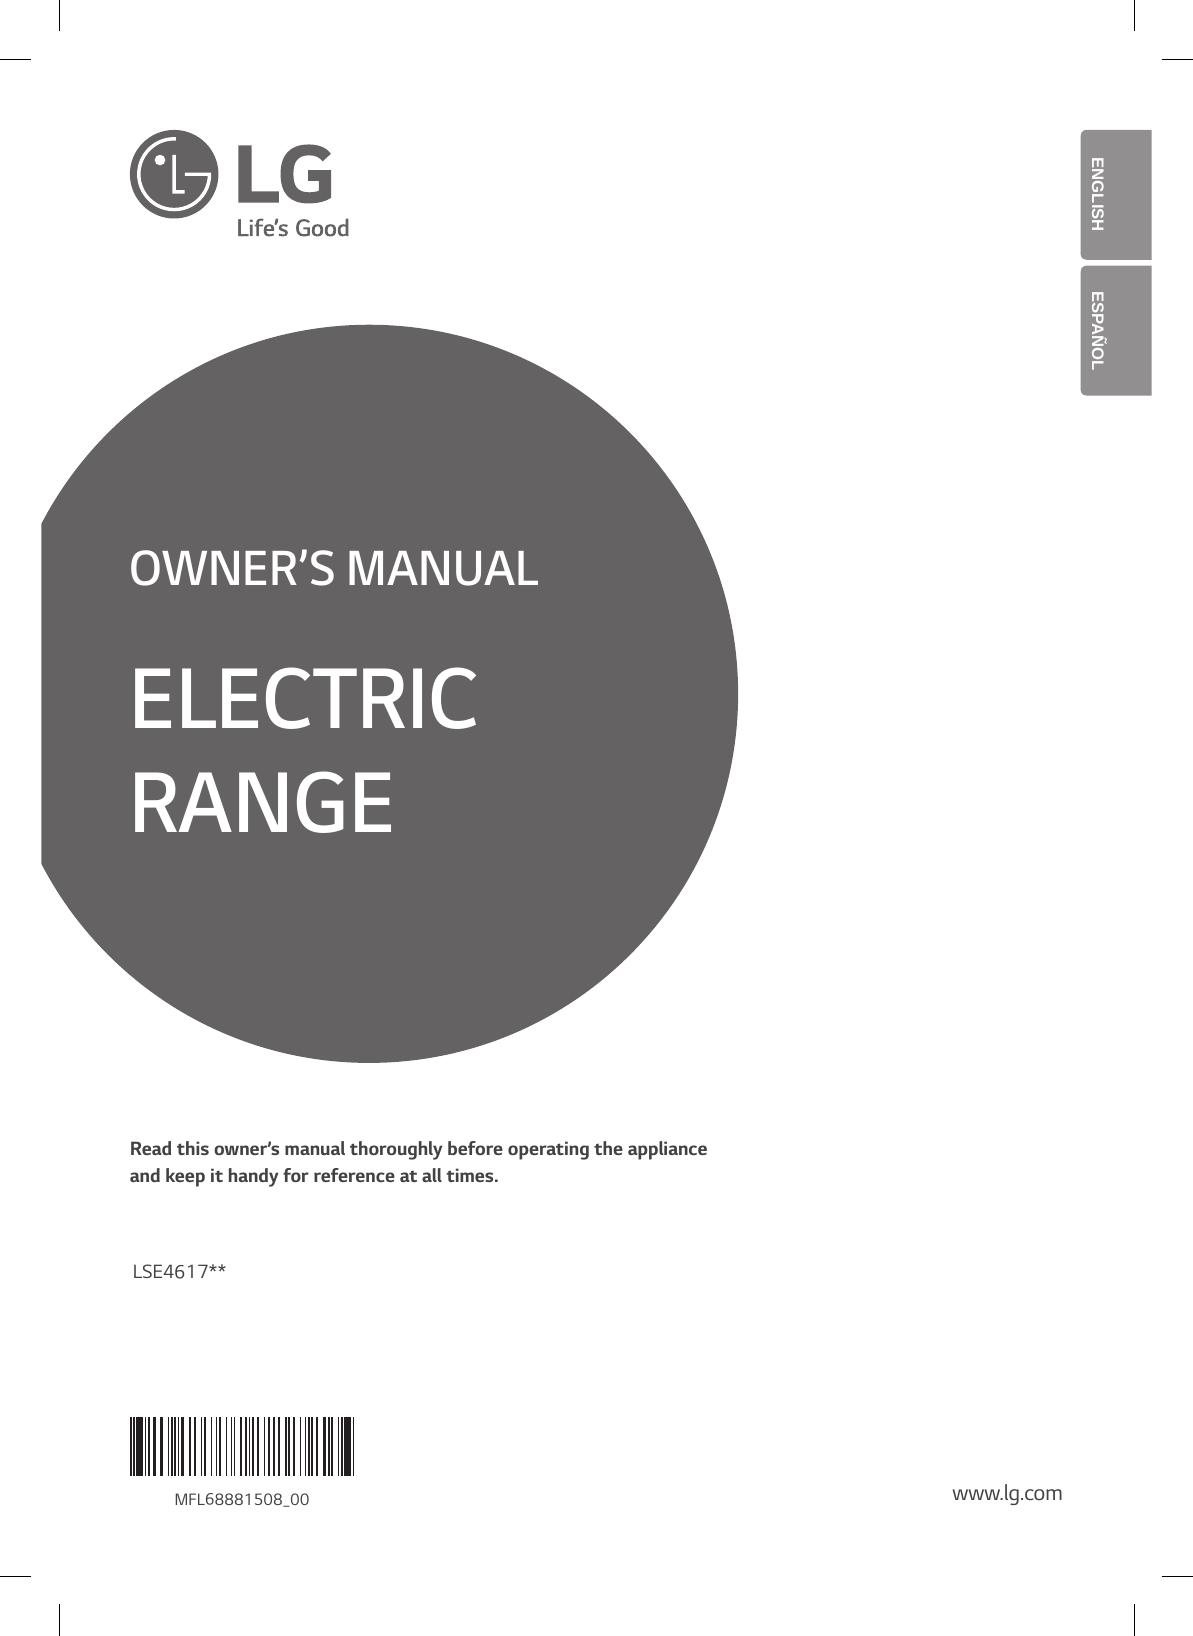 ENGLISH ESpañoLOWNER’S MANUALELECTRIC RANGERead this owner’s manual thoroughly before operating the appliance  and keep it handy for reference at all times.www.lg.comMFL68881508_00LSE4617**